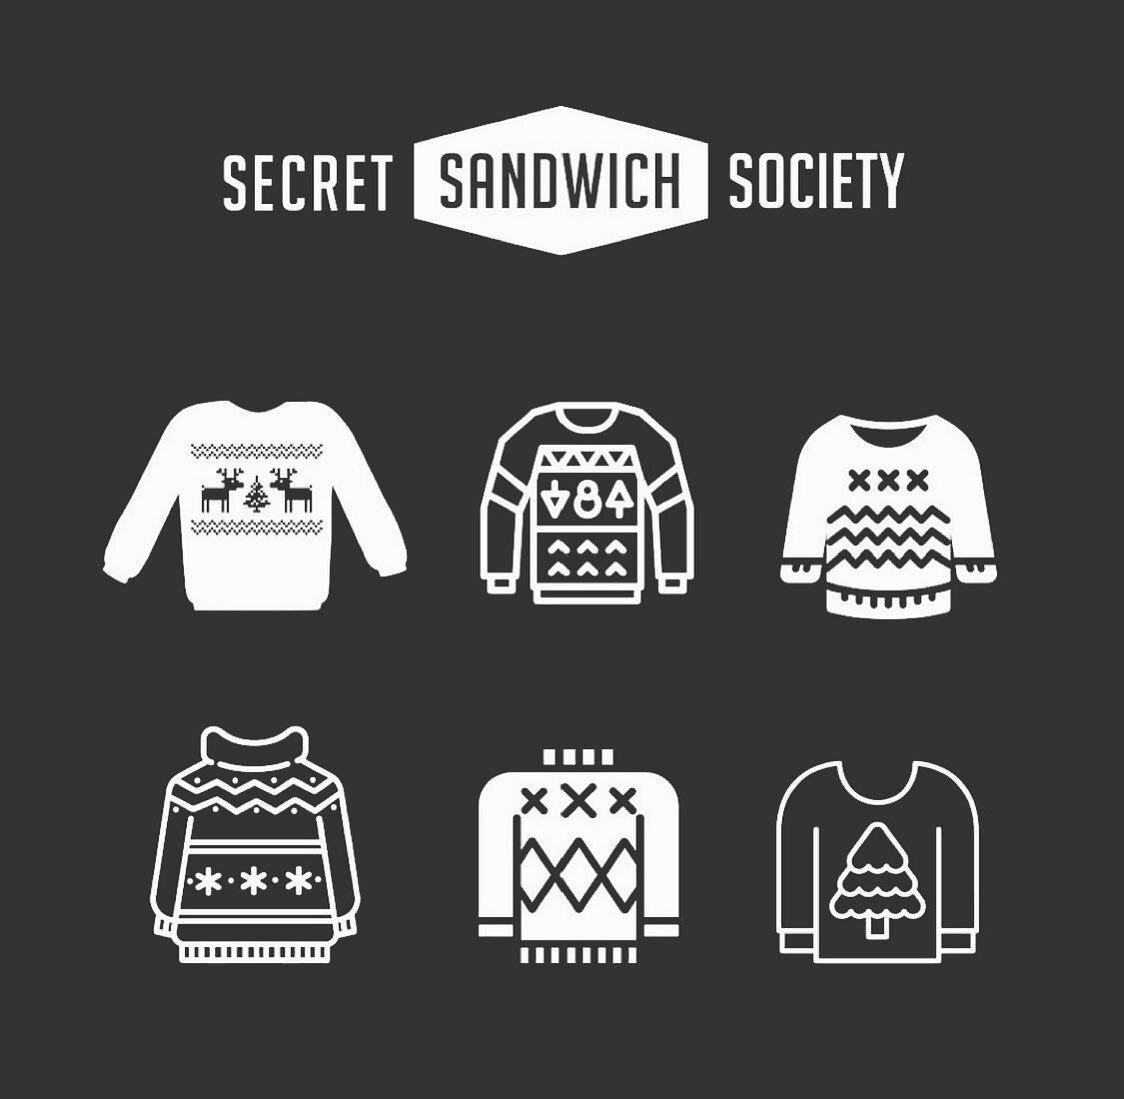 Ugly Sweater Day! Wear your holiday sweater to SSS today and receive 15% off of your bill. Grab your festive wear and get into the spirit! (Check out our Secret Spirits cocktail menu, too! Smoked Old Fashioned, anyone? 🥃)
&bull;
#secretsandwichsocie